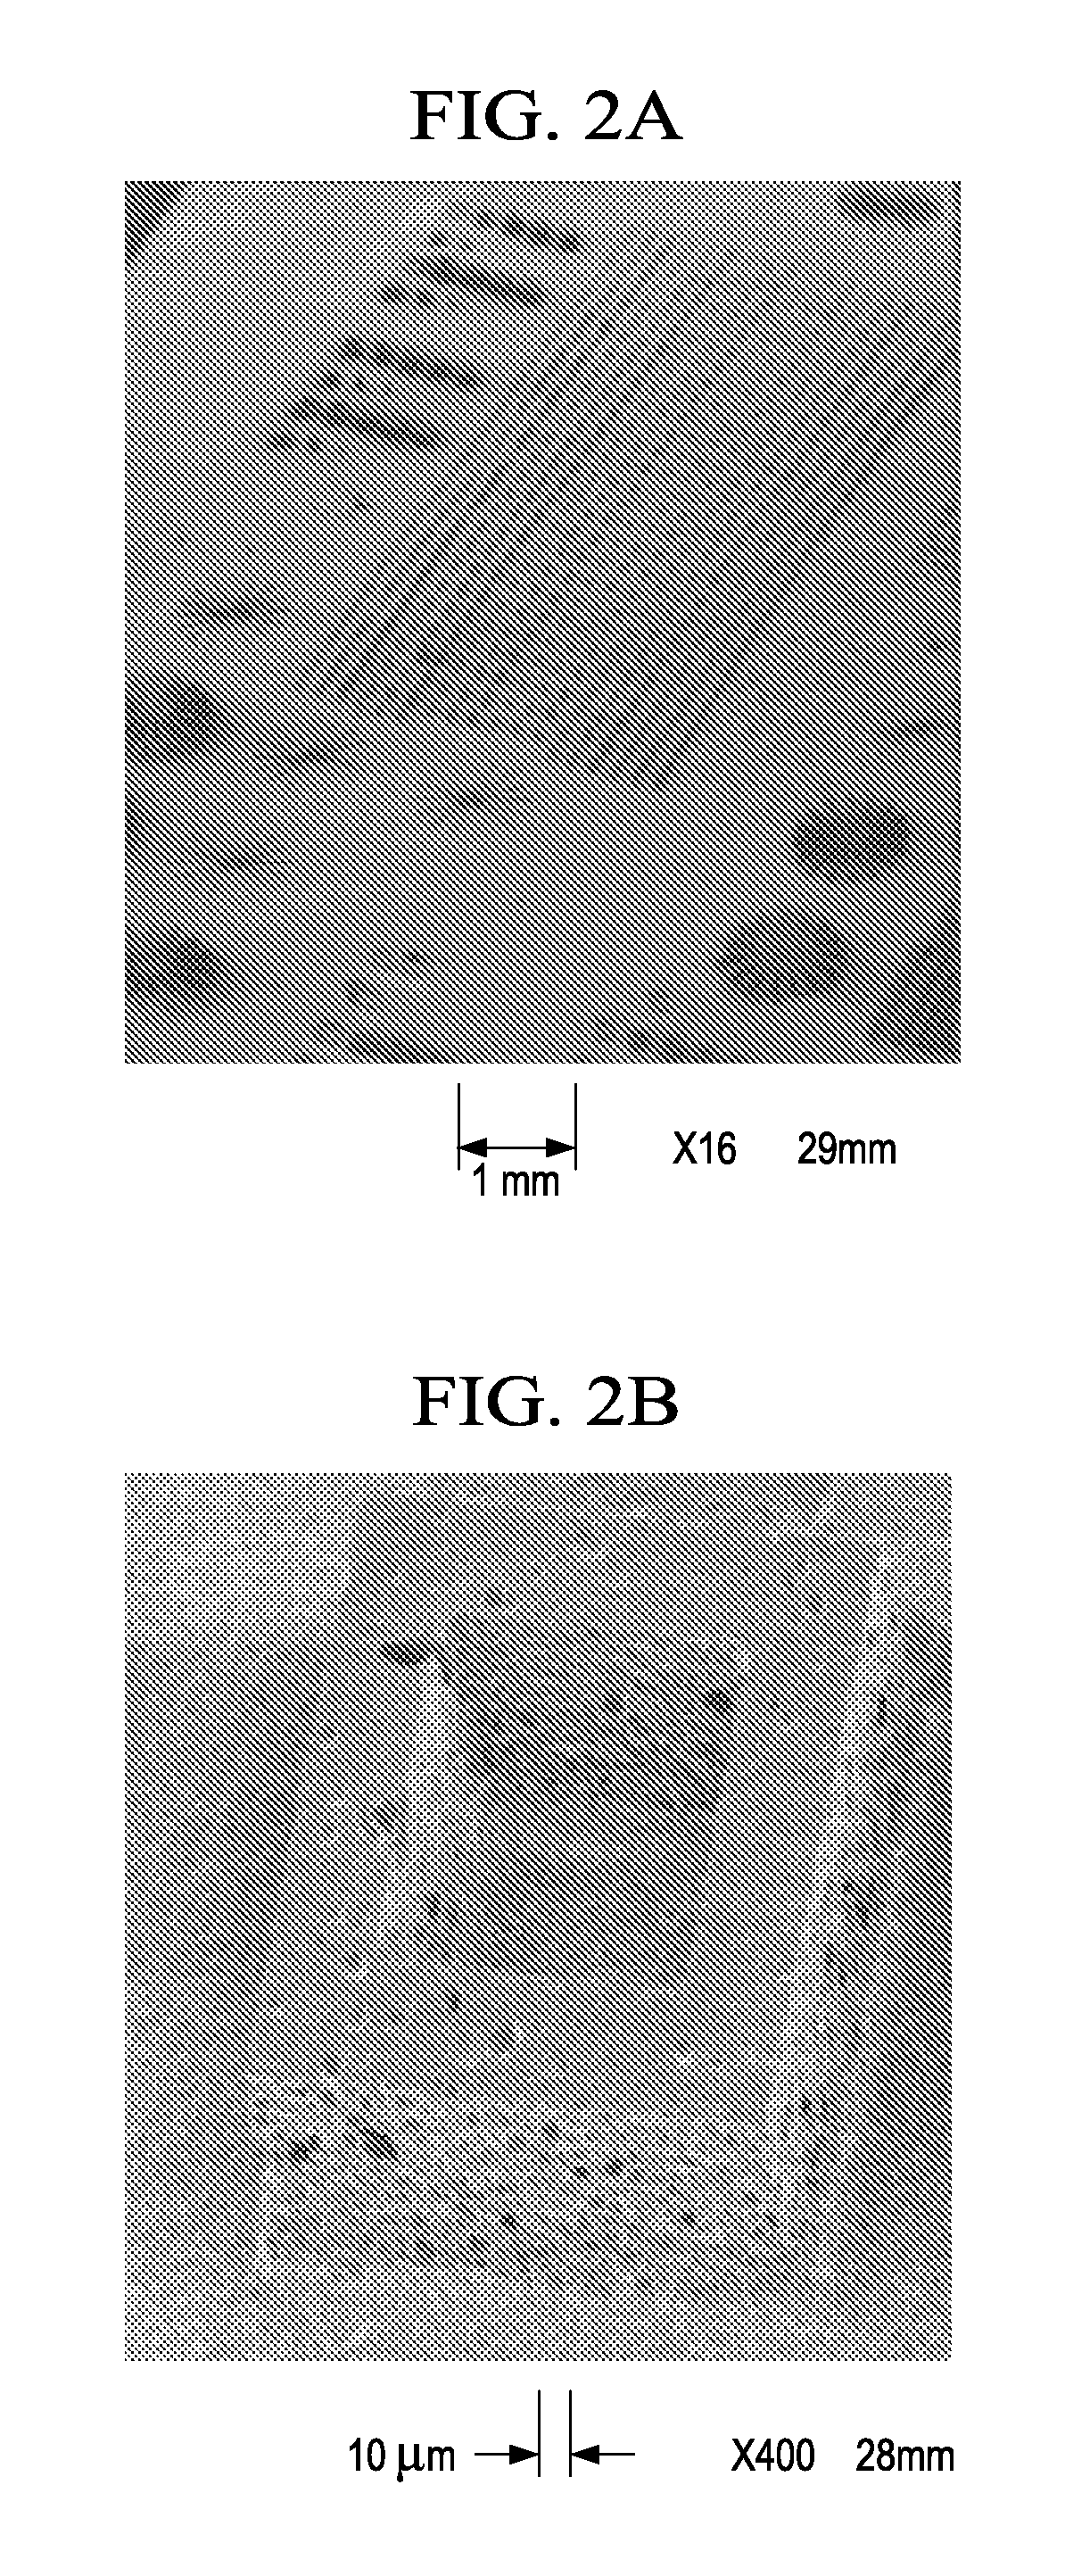 Methods to fabricate a photoactive substrate suitable for shaped glass structures